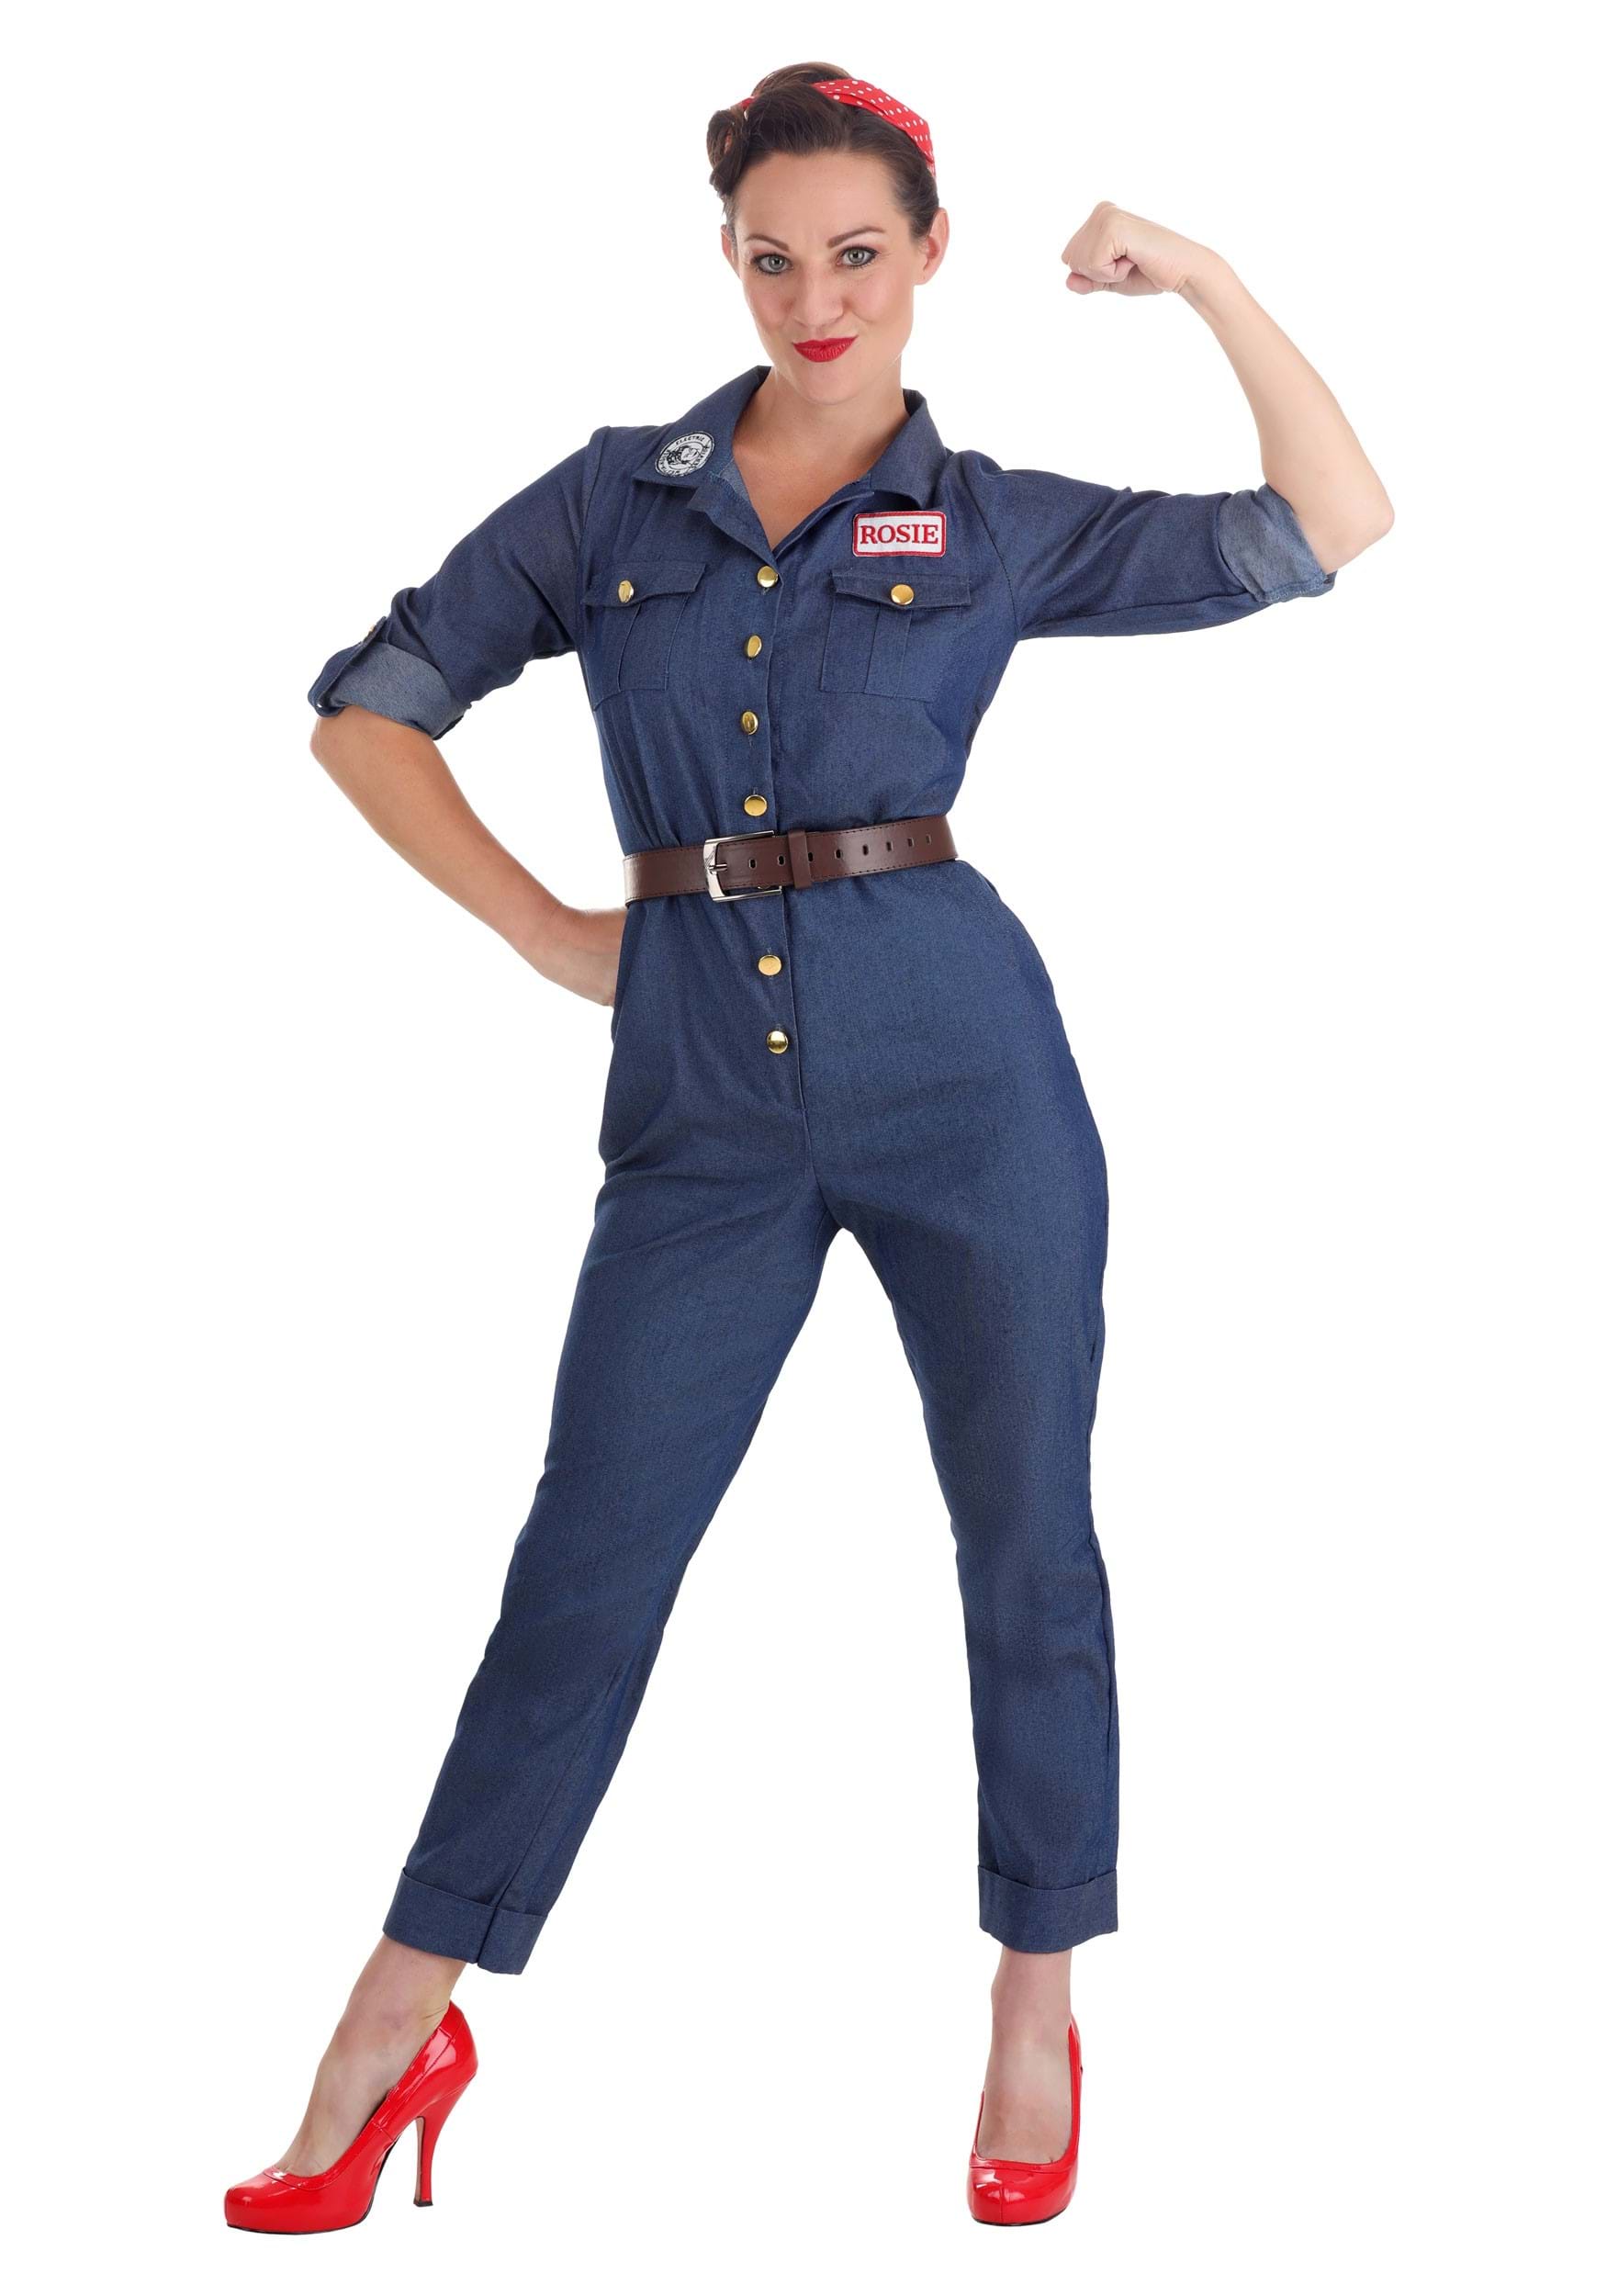 Womens WWII Icon Costume